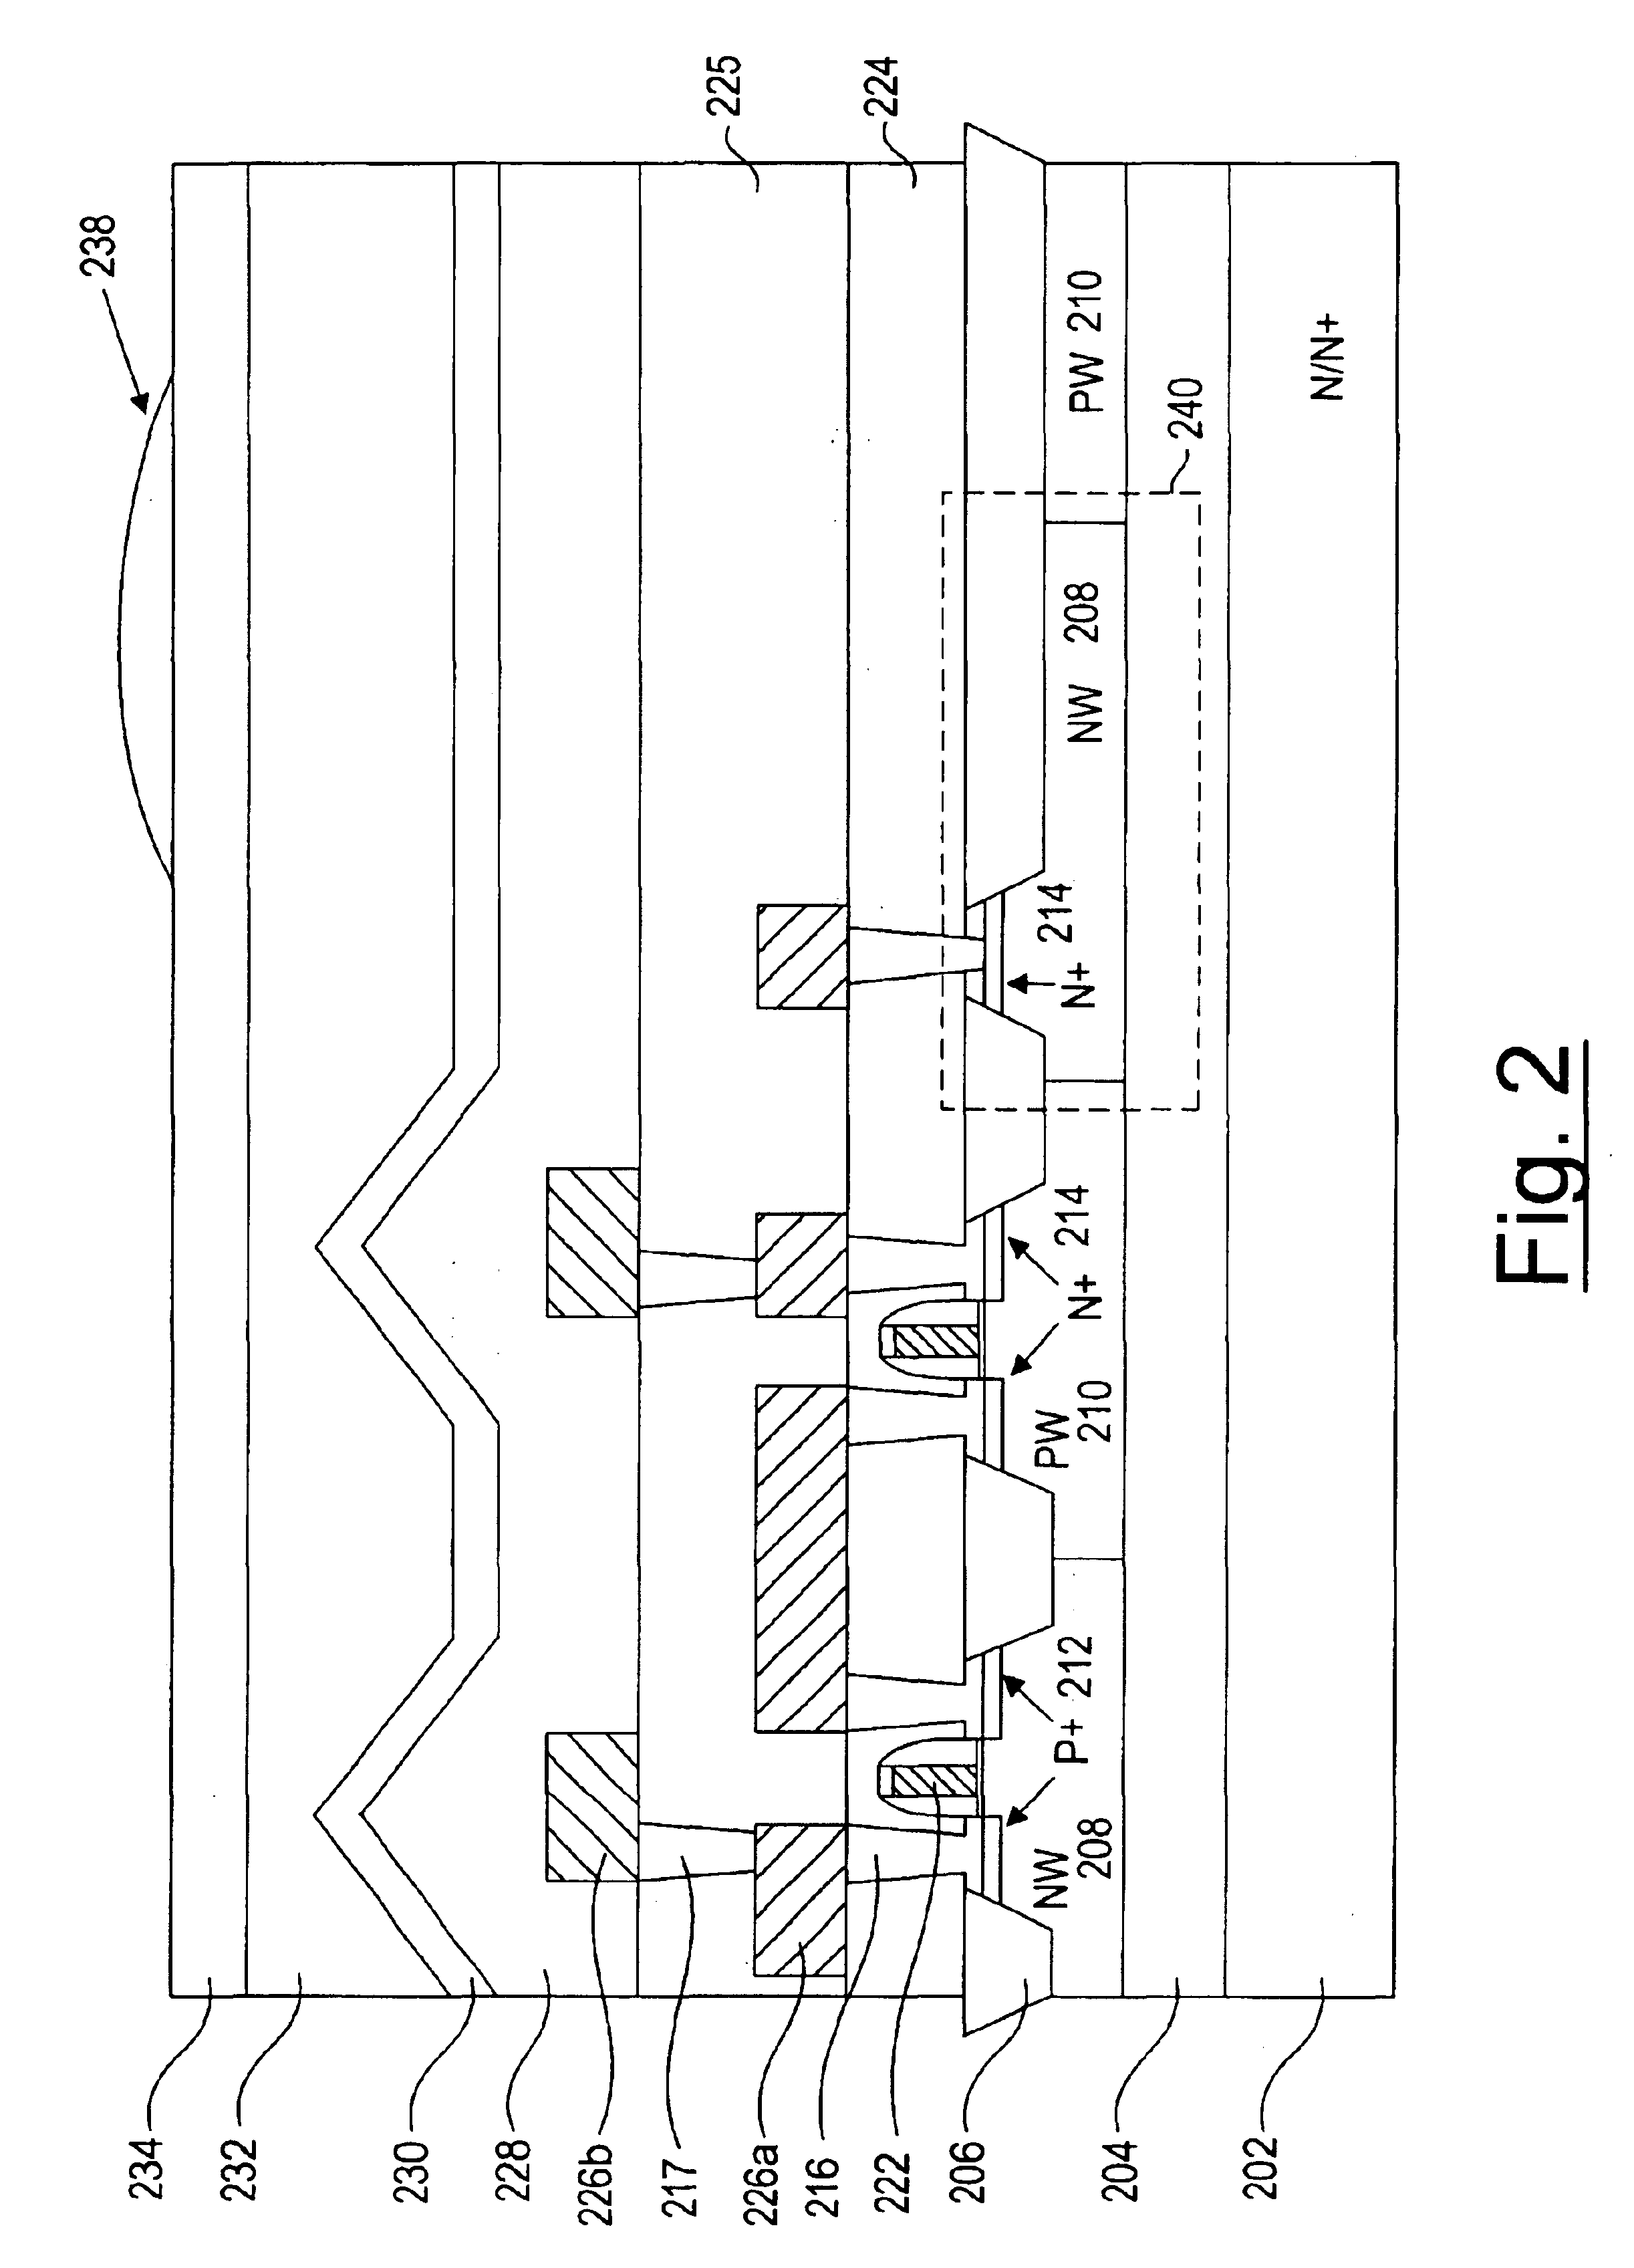 CMOS image sensor with substrate noise barrier